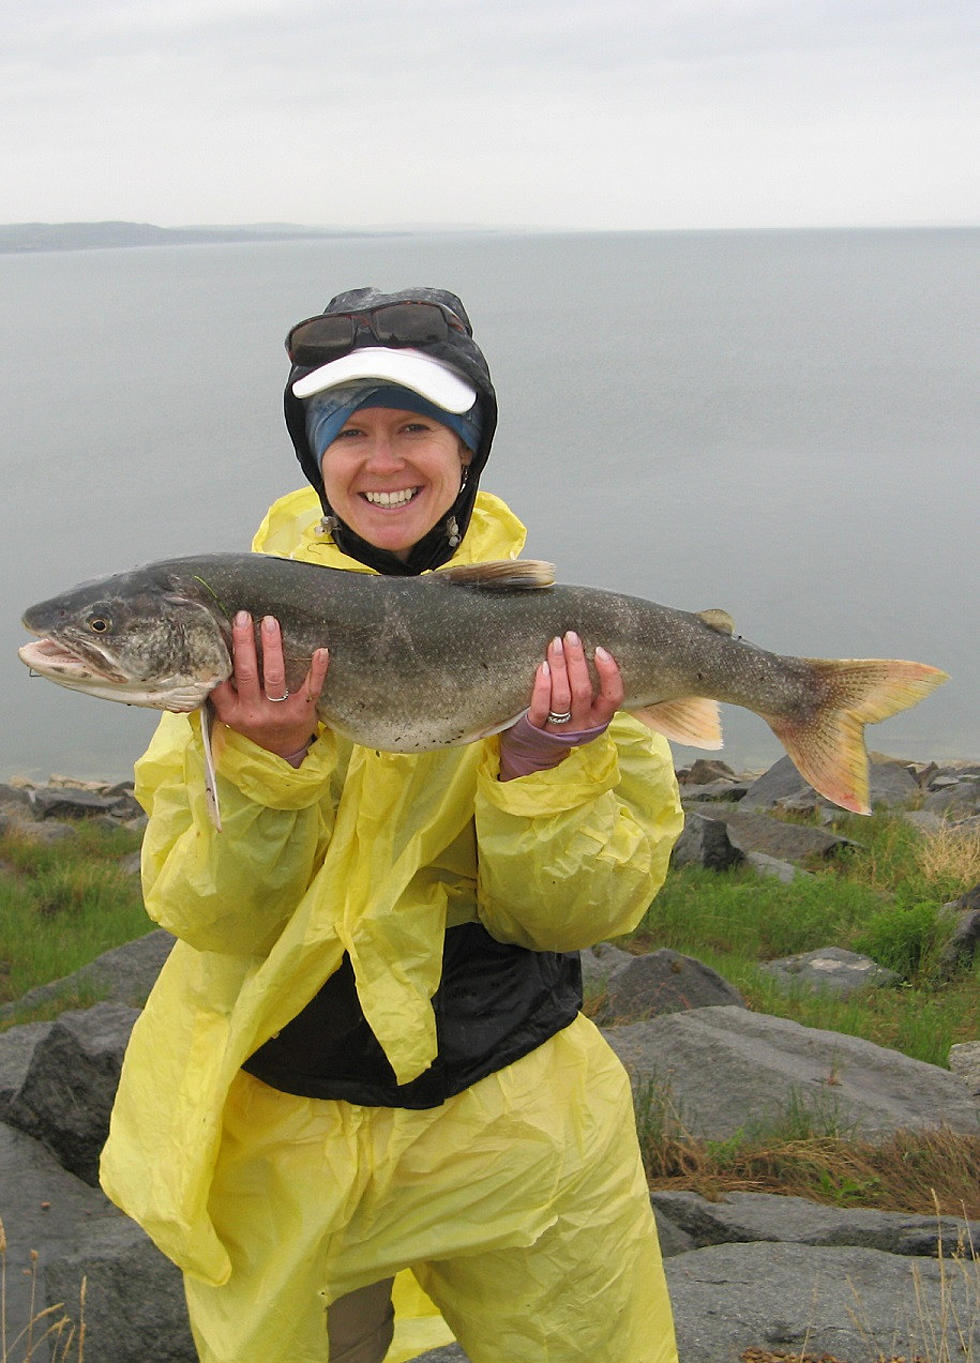 Congratulations to Our ‘Biggest Catch’ Photo Contest Winner Jessica Doke